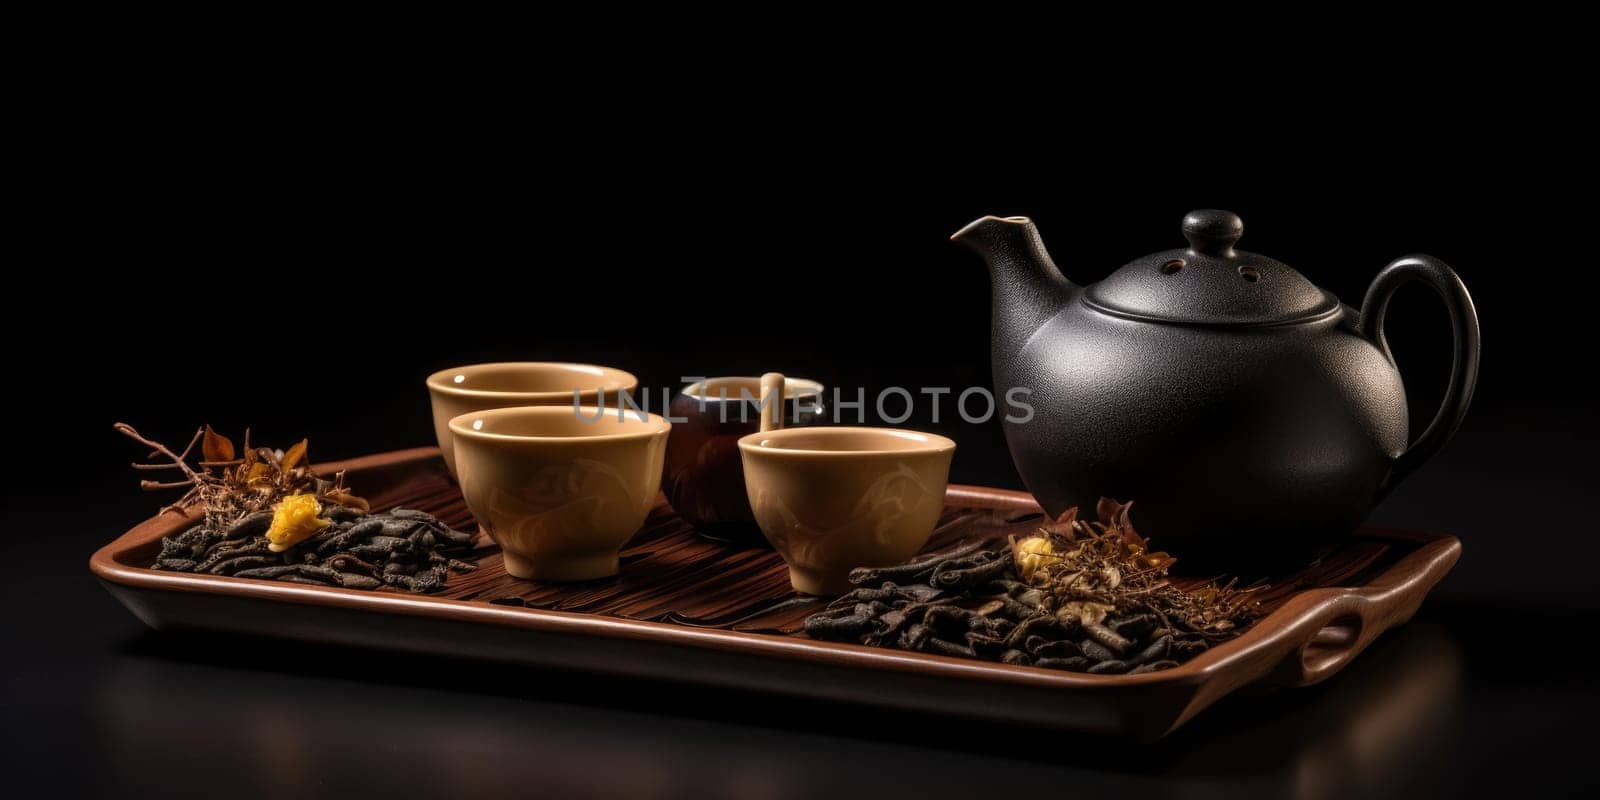 Hot Teapot And Teacups On wooden Mat, dark background. AI Generated